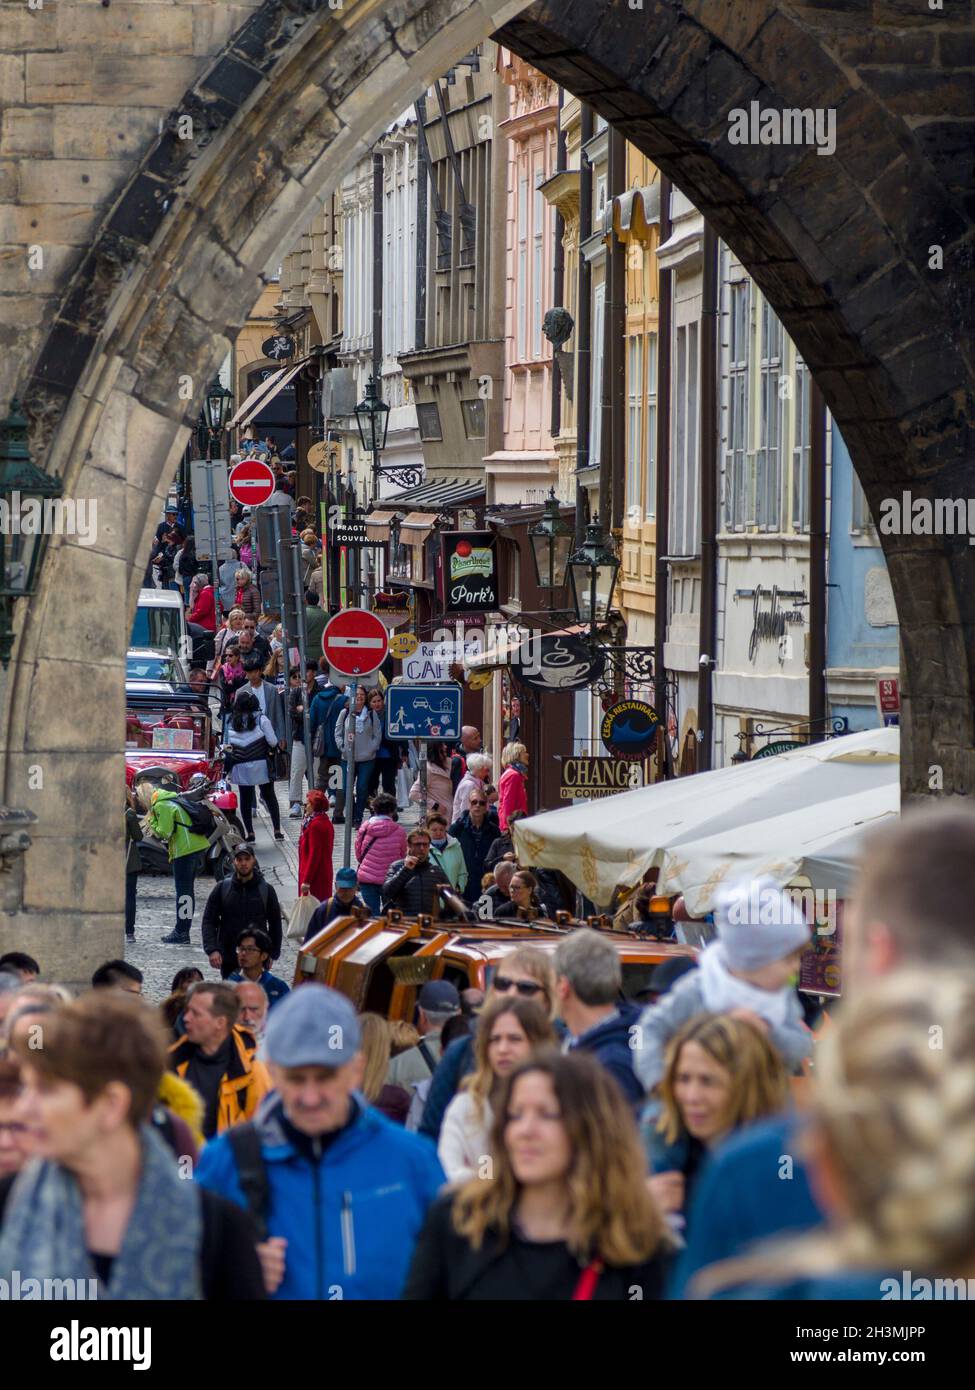 Busy Prague shopping street: The view through the Powder Tower in Prague many shoppers and tourists crowd the popular shopping street. Stock Photo